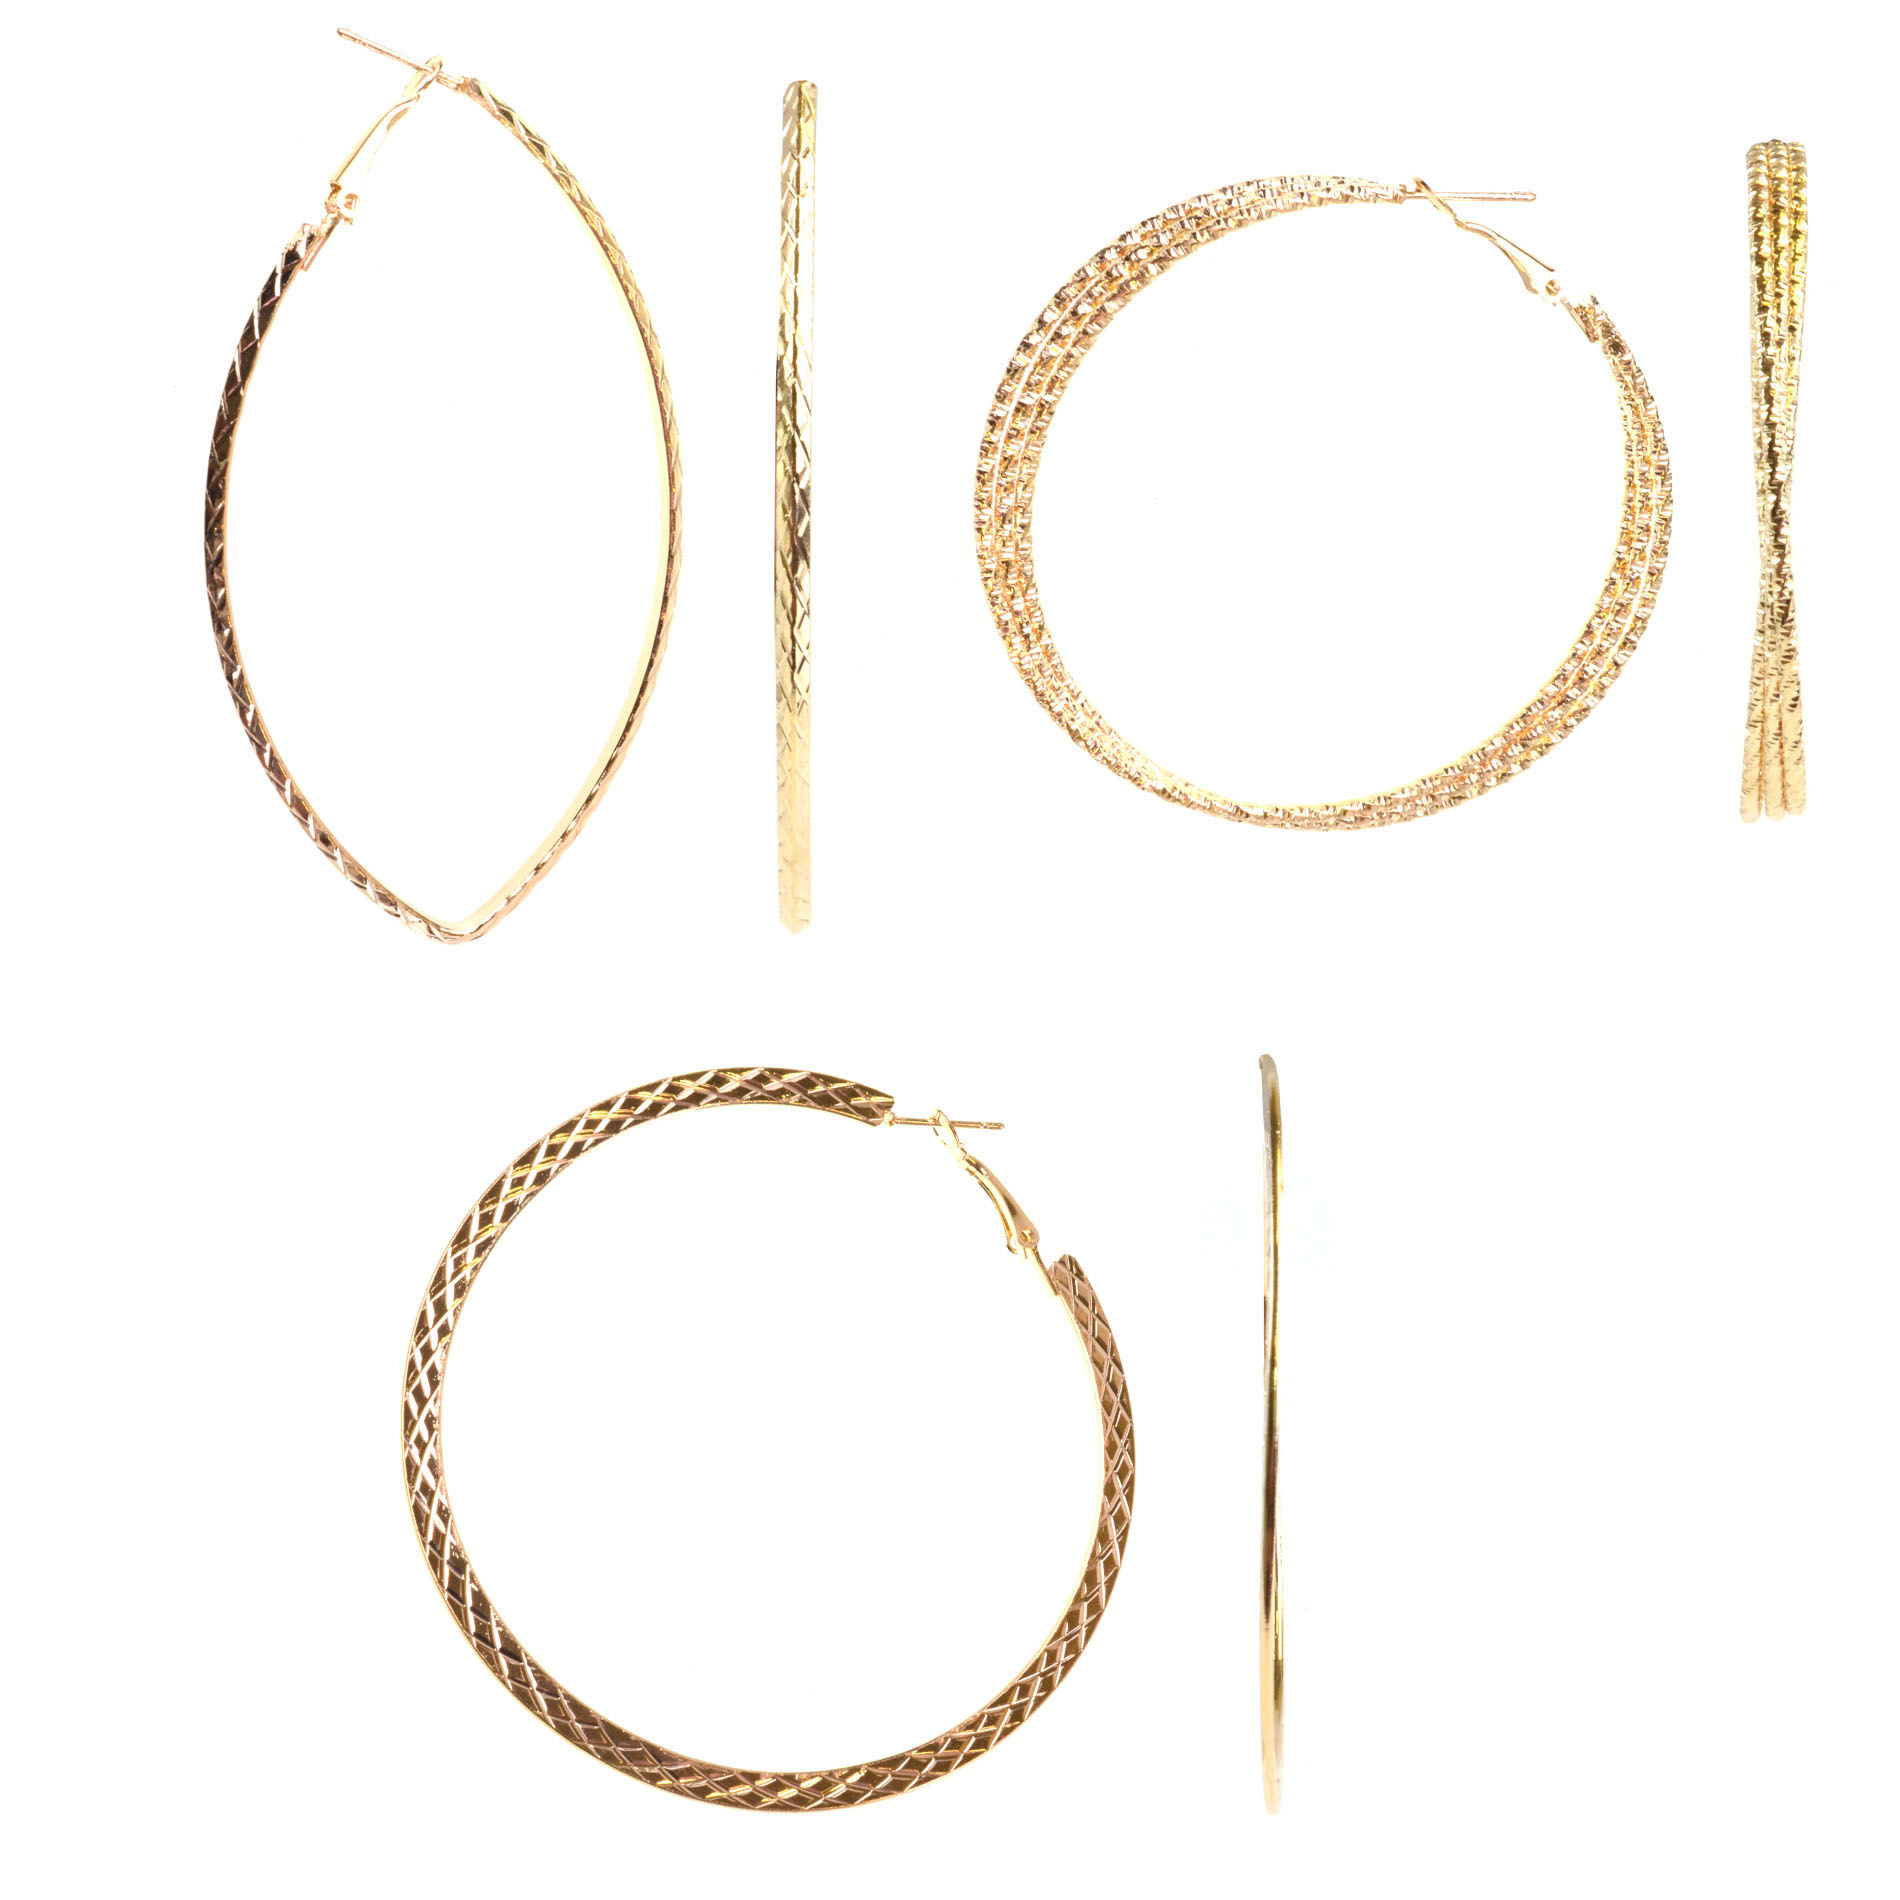 Attention Set of 3 Textured Hoop Earrings